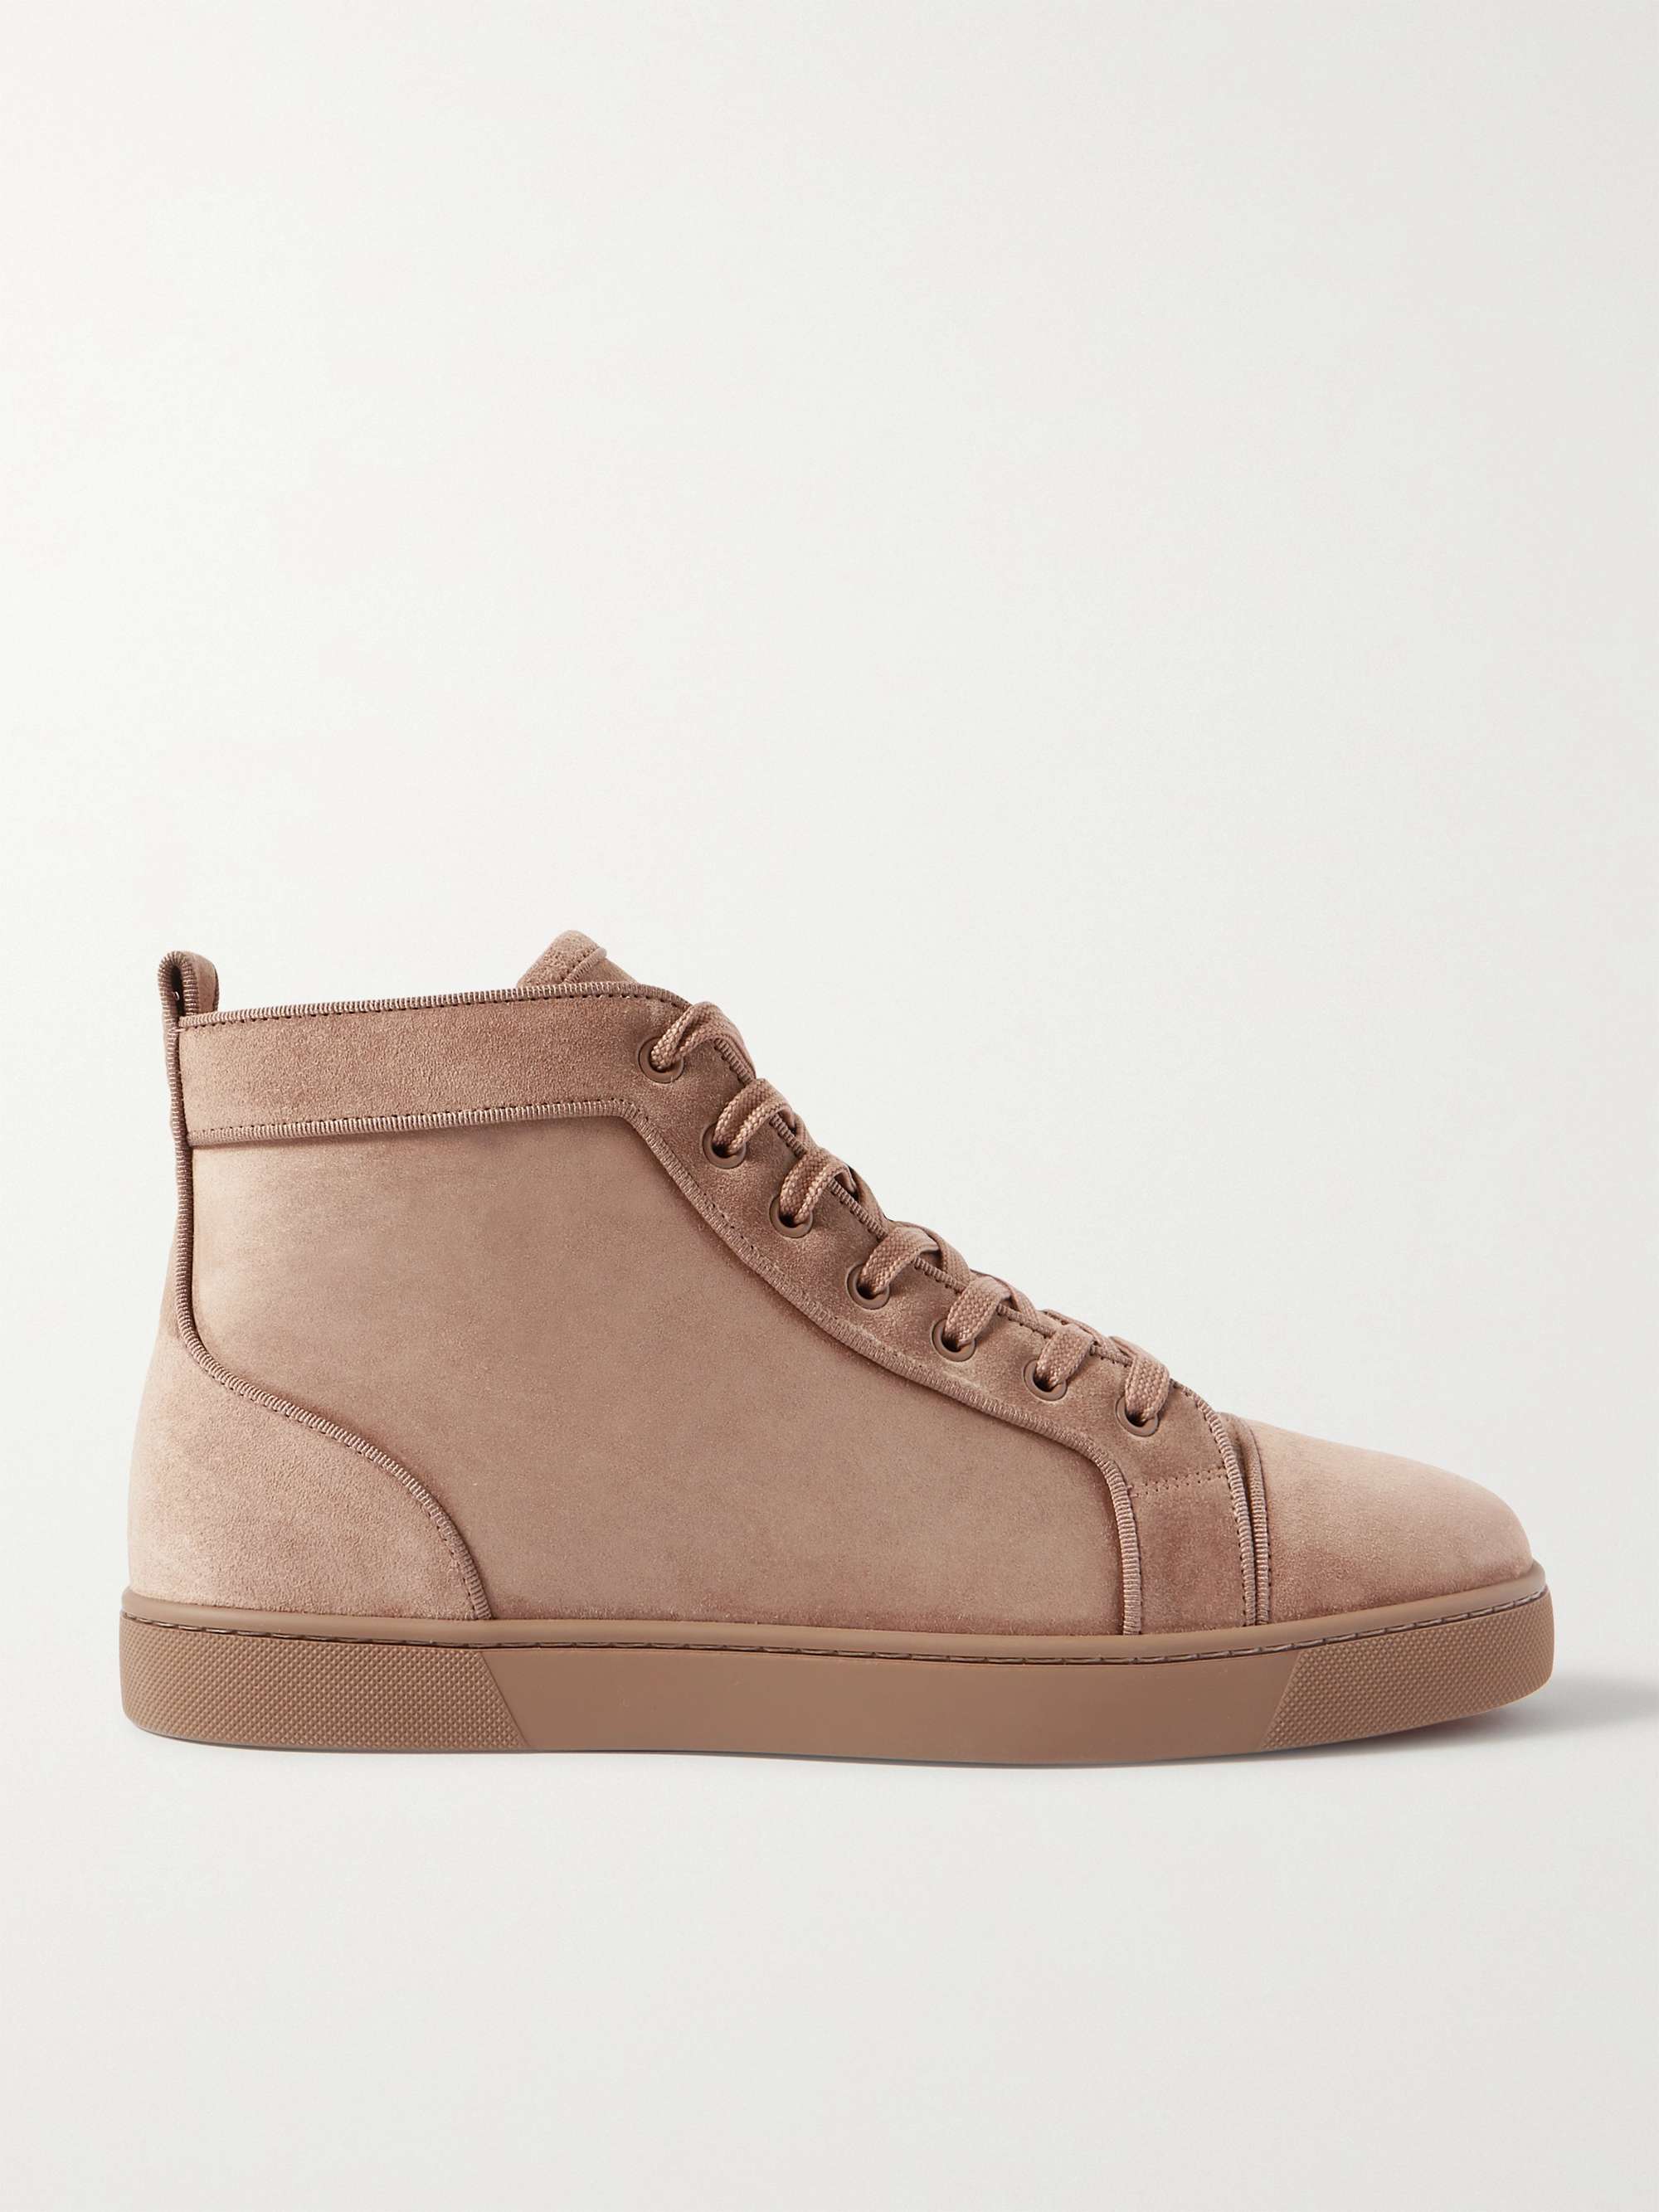 CHRISTIAN LOUBOUTIN Louis Orlato Grosgrain-Trimmed Suede High-Top Sneakers  | MR PORTER